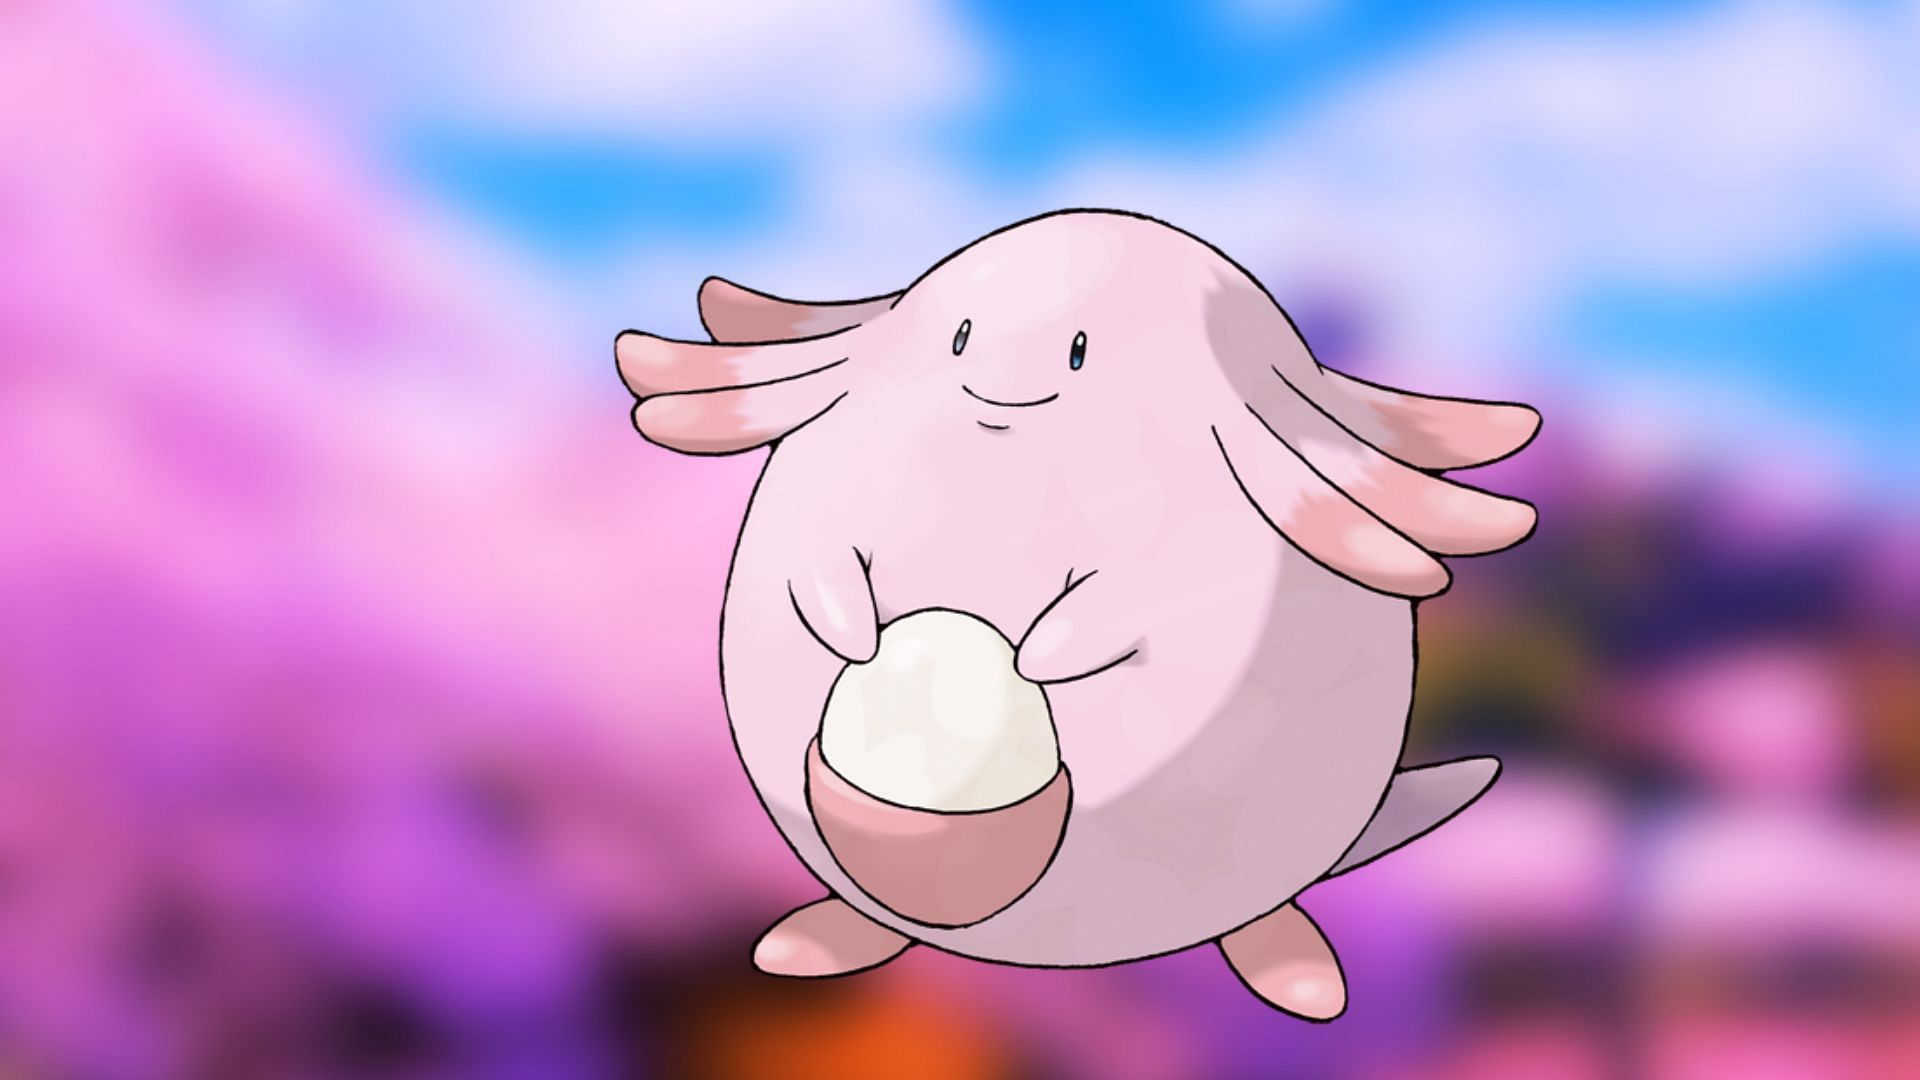 Know Chansey best moveset, counters, and battle usage in Pokemon GO